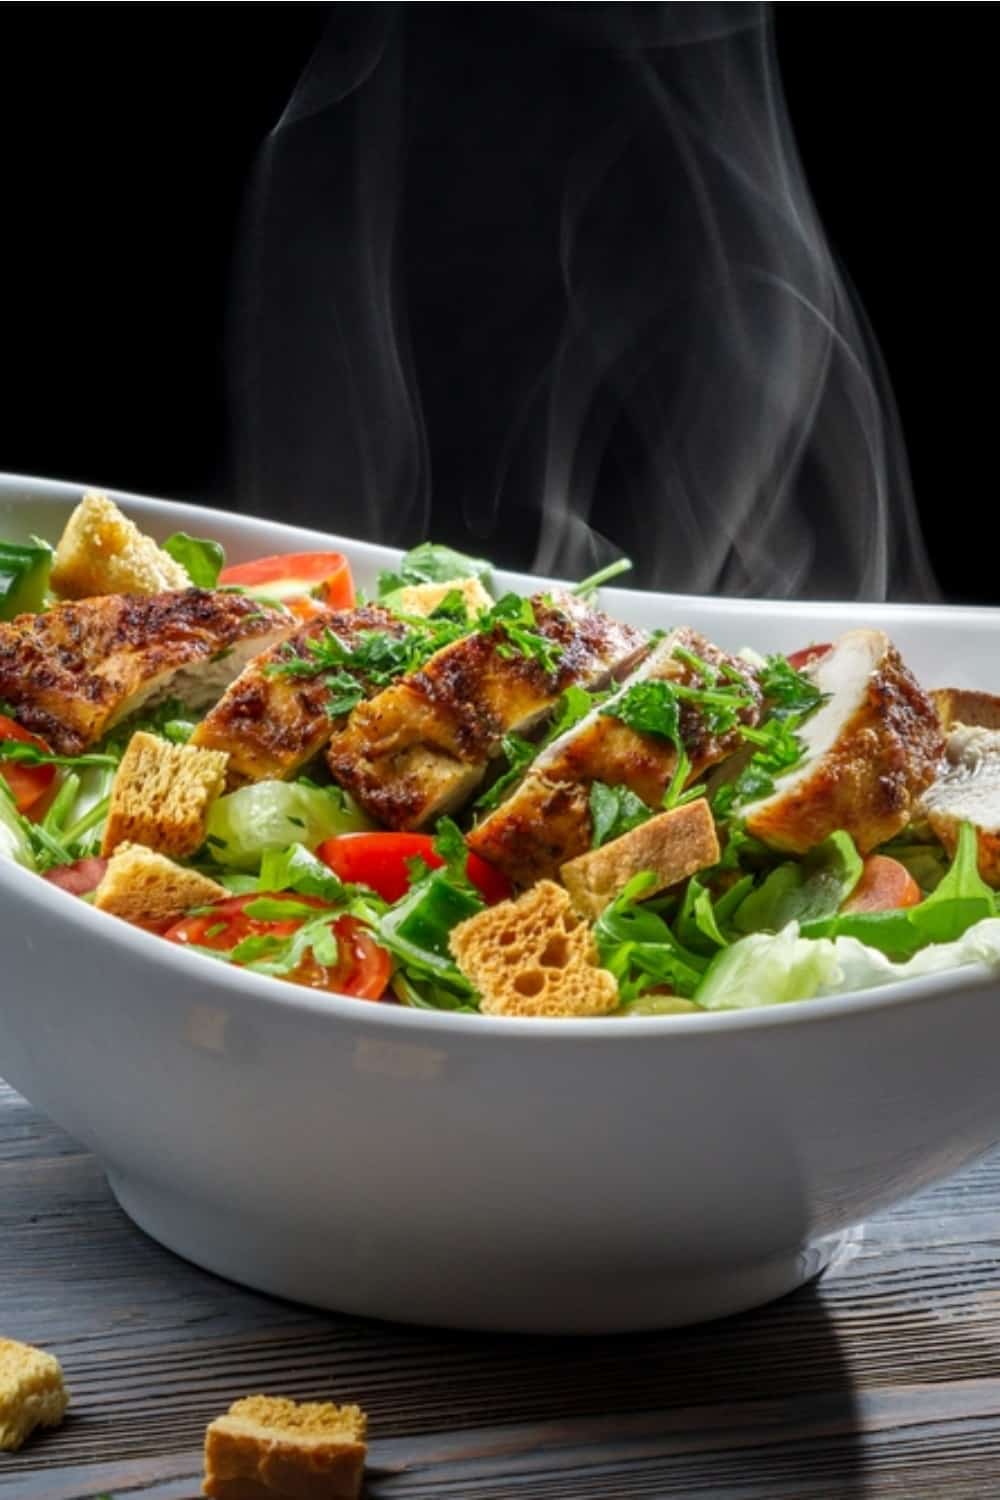 Caesar salad with hot chicken and fresh vegetables